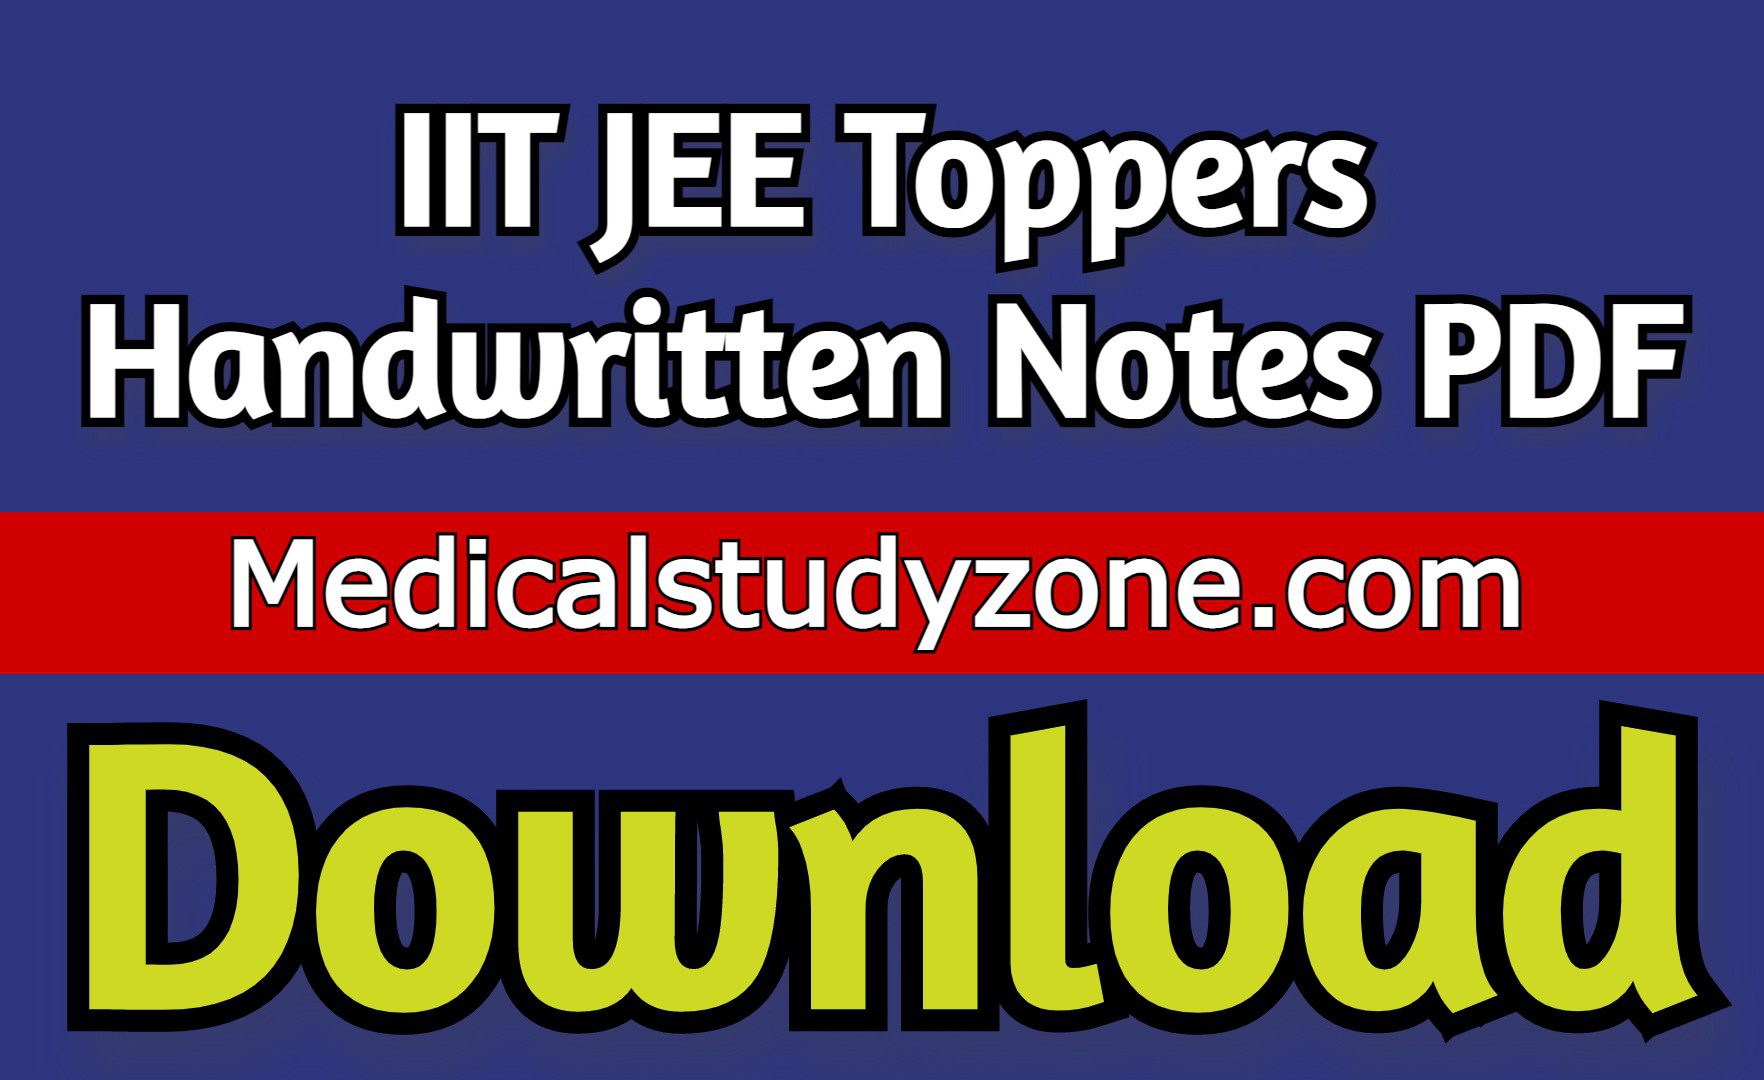 IIT JEE Toppers Handwritten Notes 2021 PDF Free Download